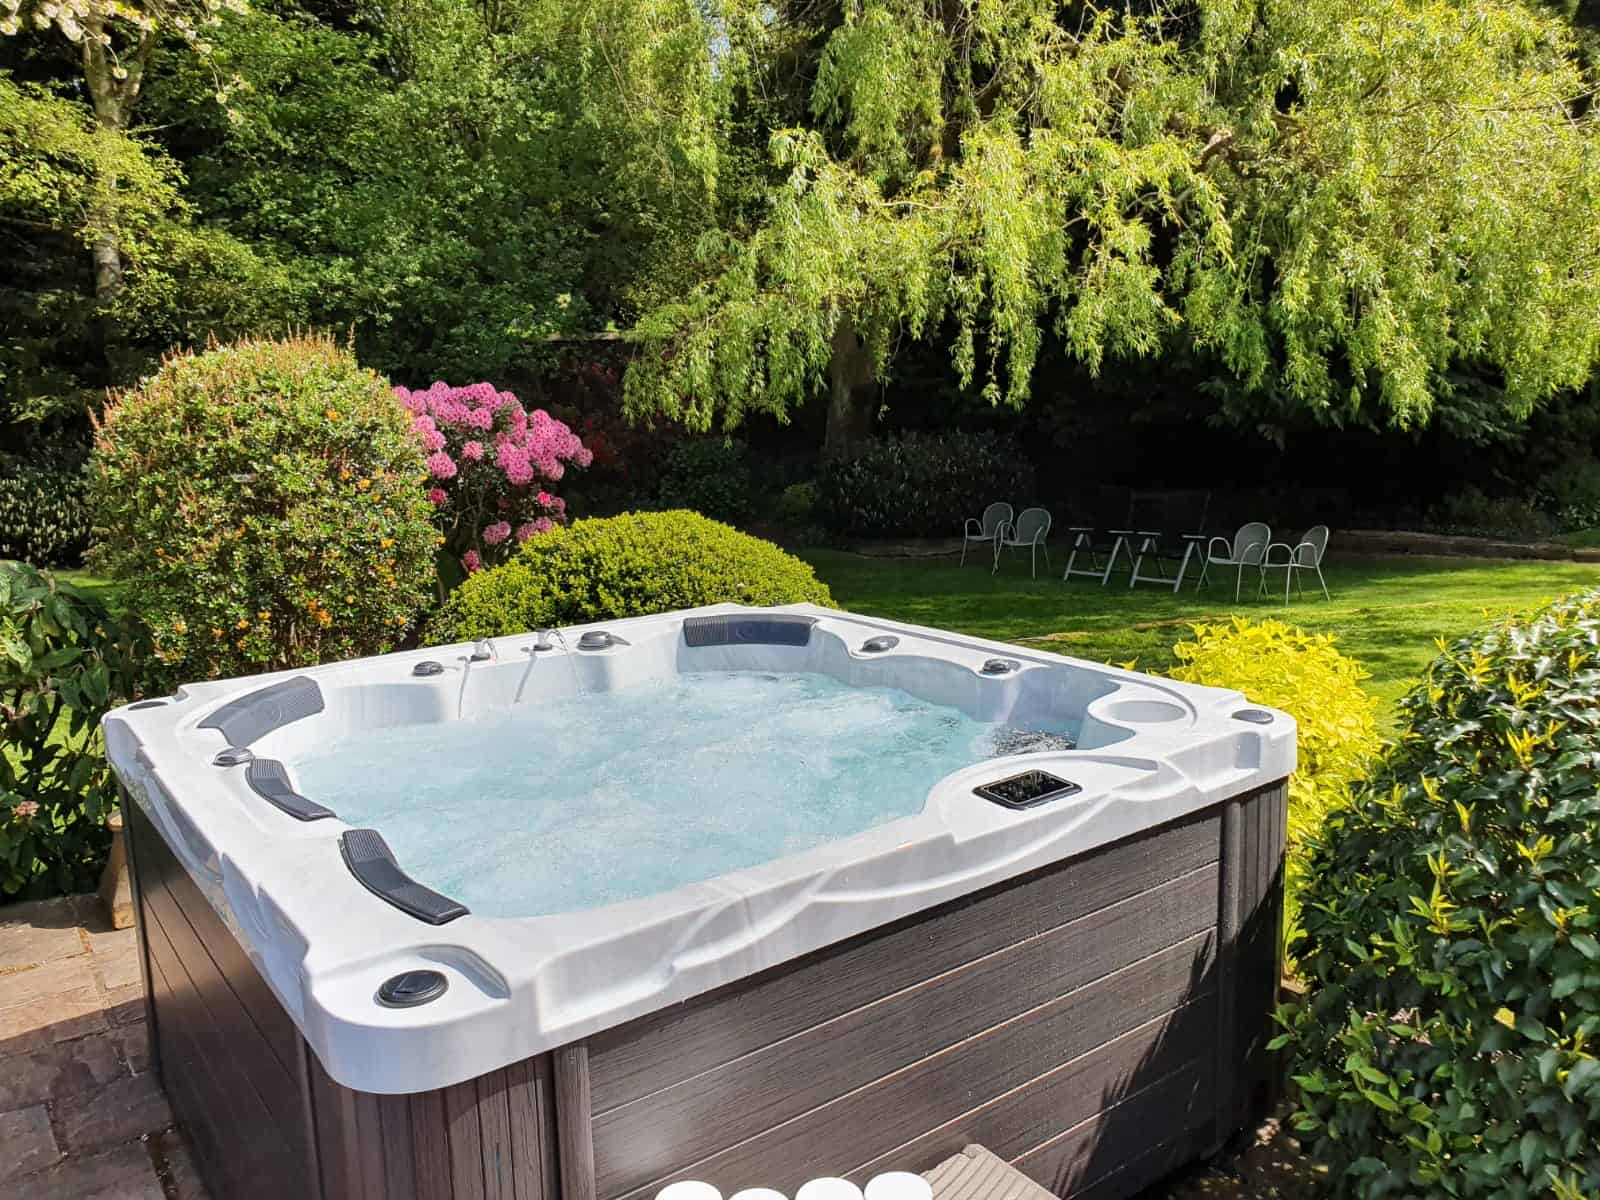 How Long Can Hot Tub Water Go Untreated?